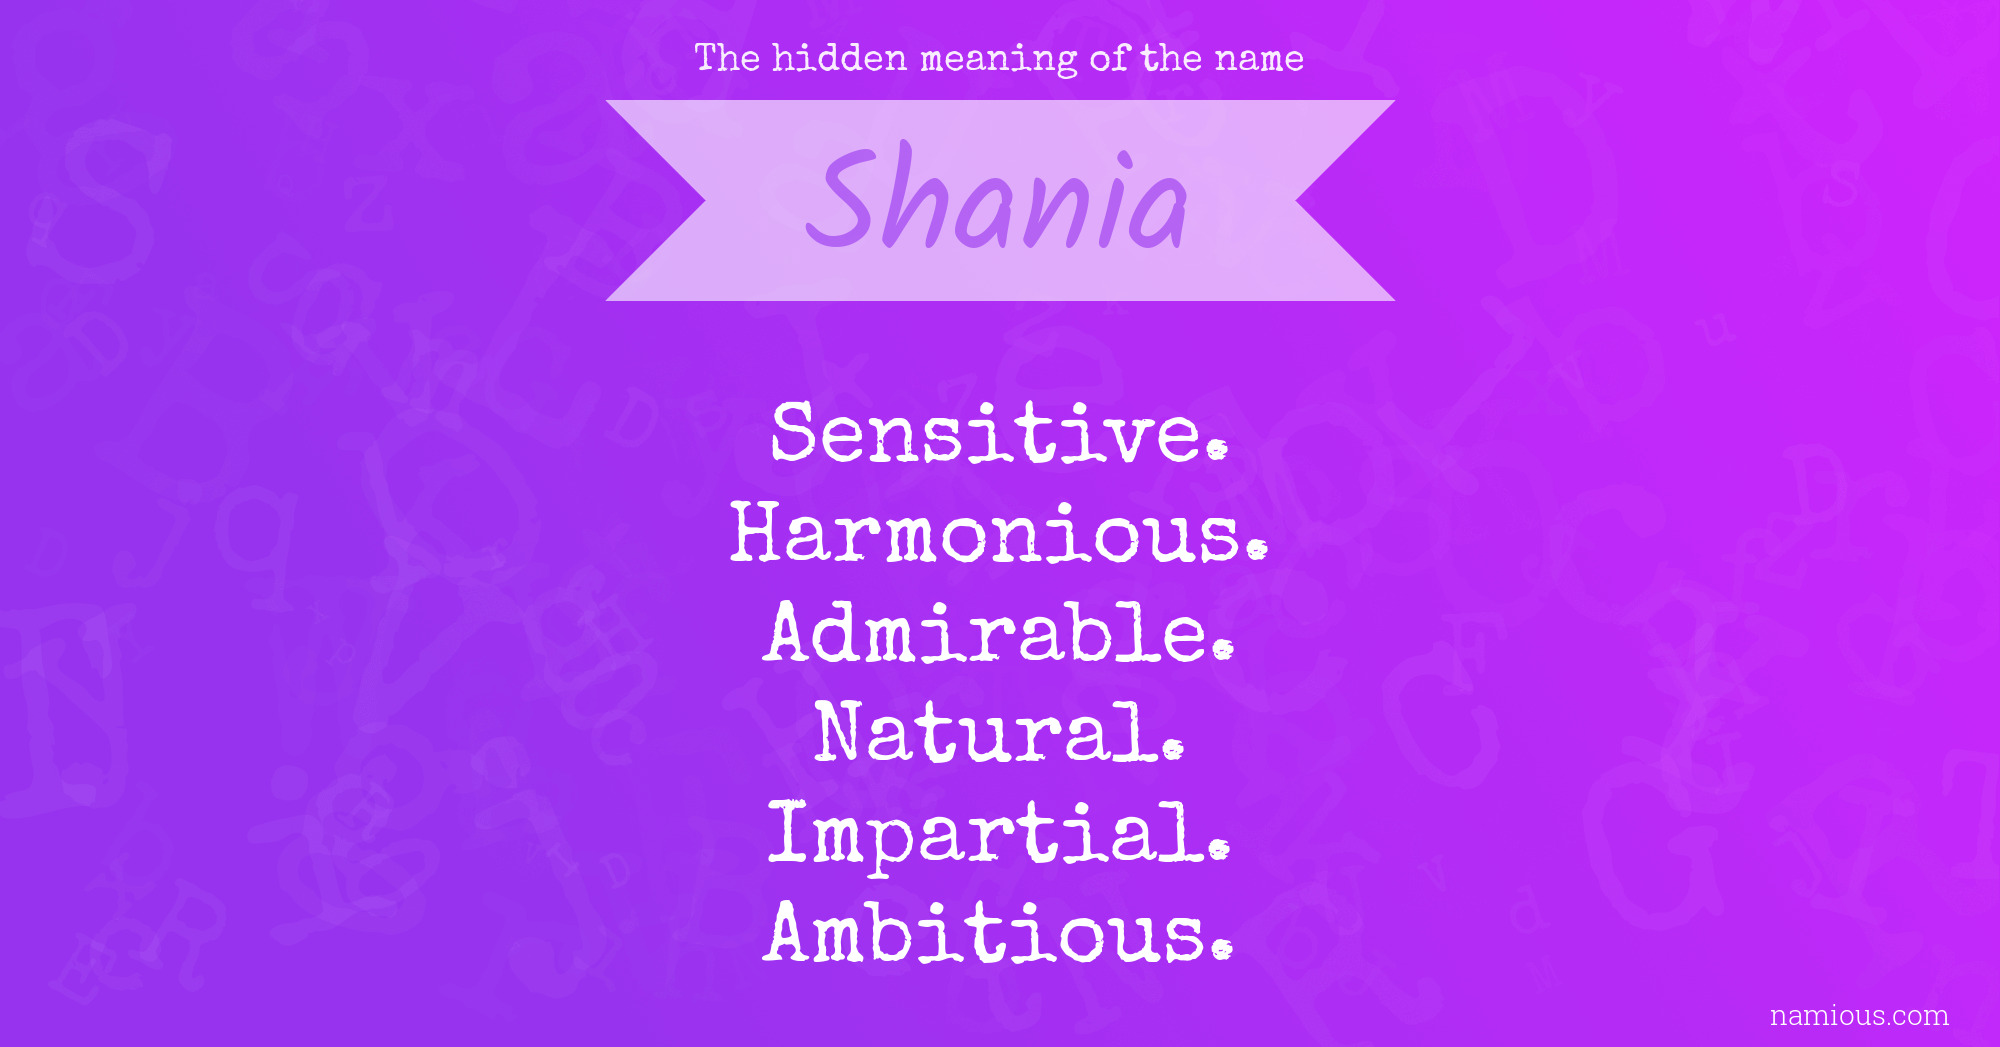 The hidden meaning of the name Shania